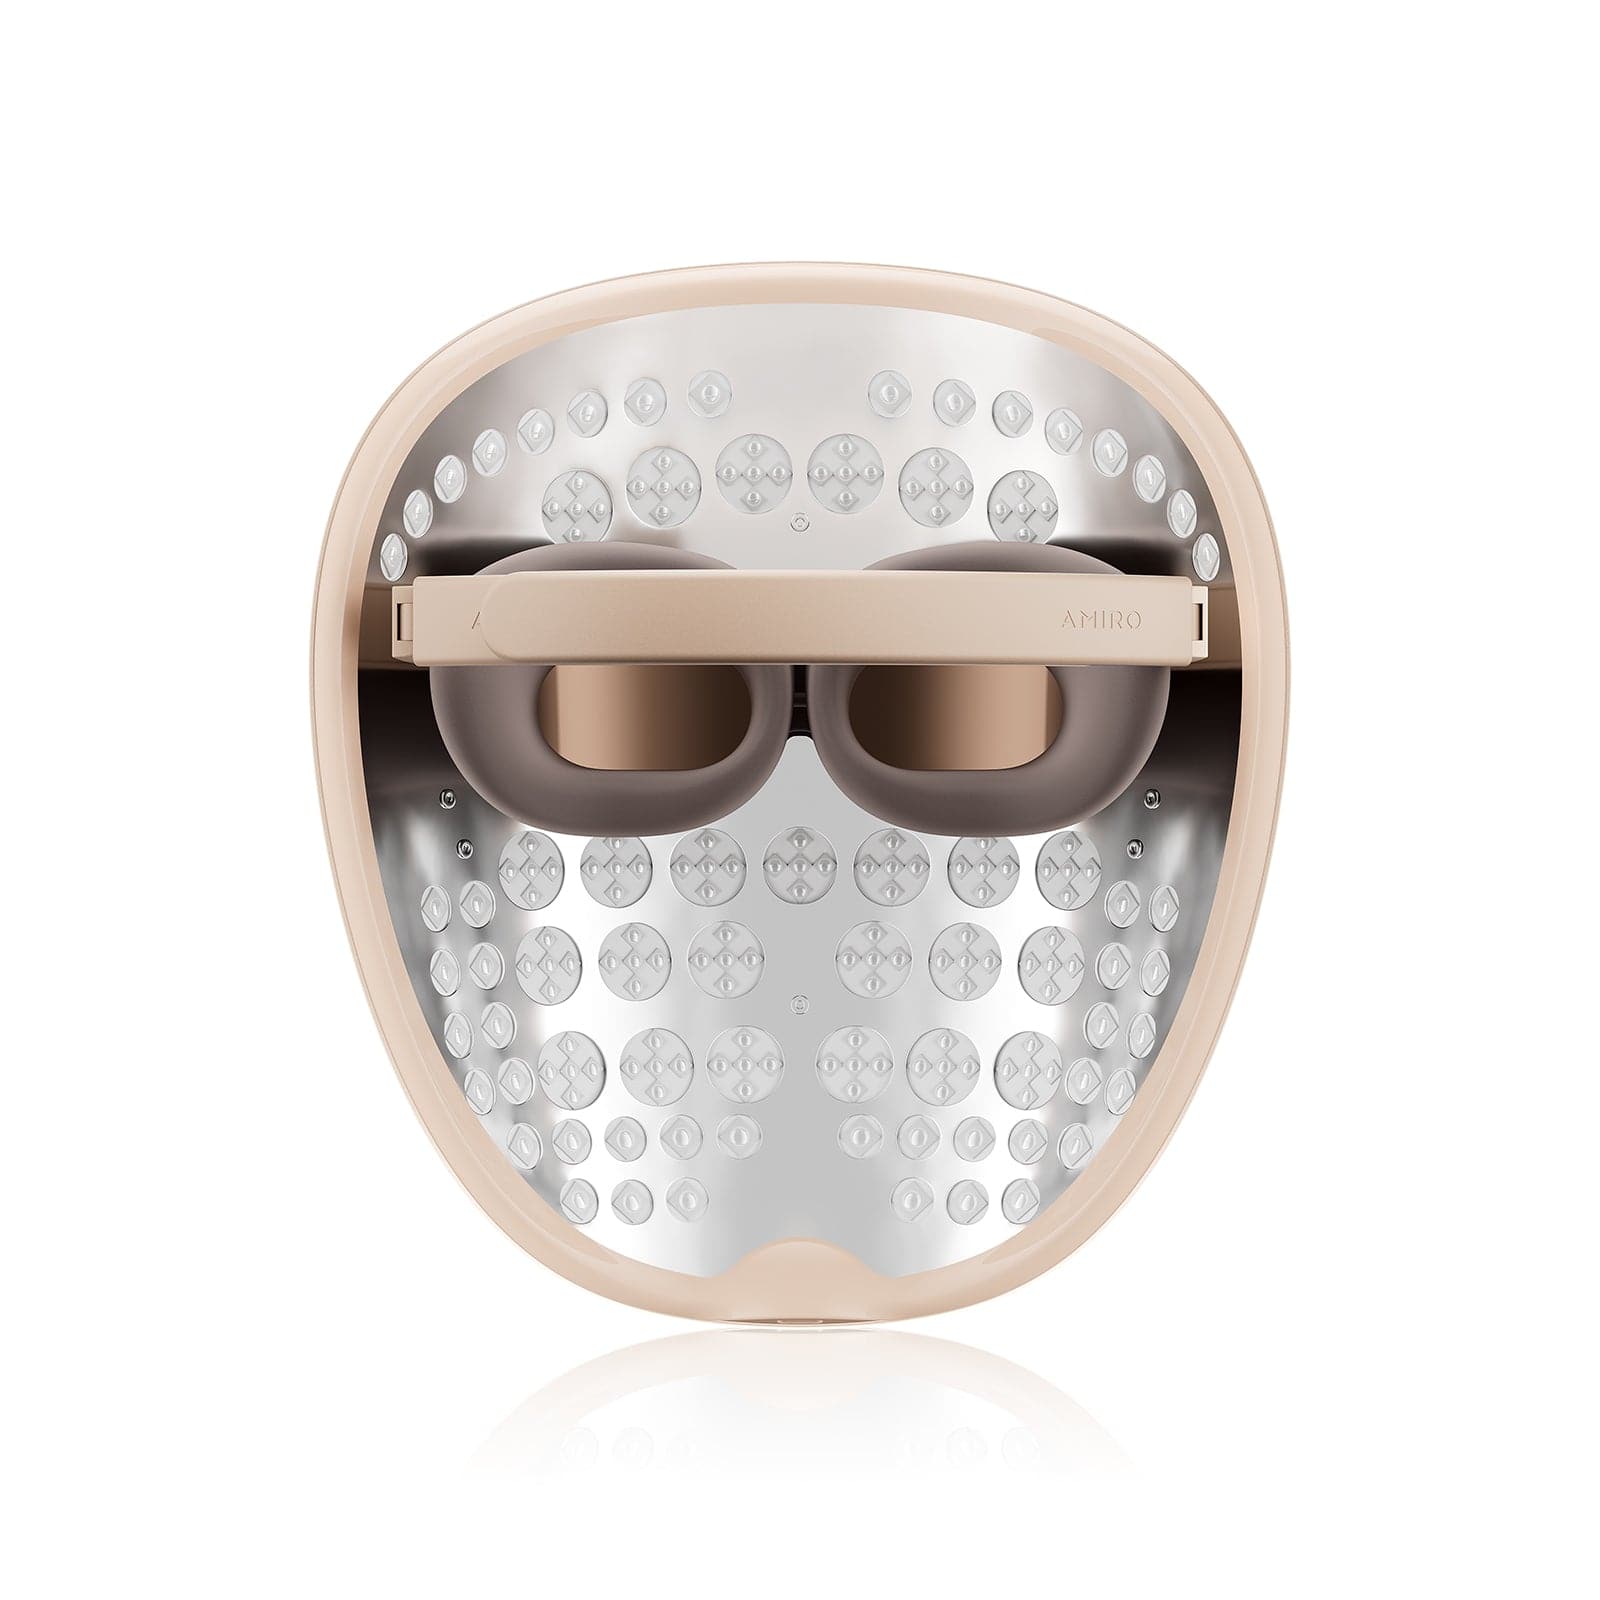 AMIRO Spectra 5-in-1 LED Light Therapy Facial Mask